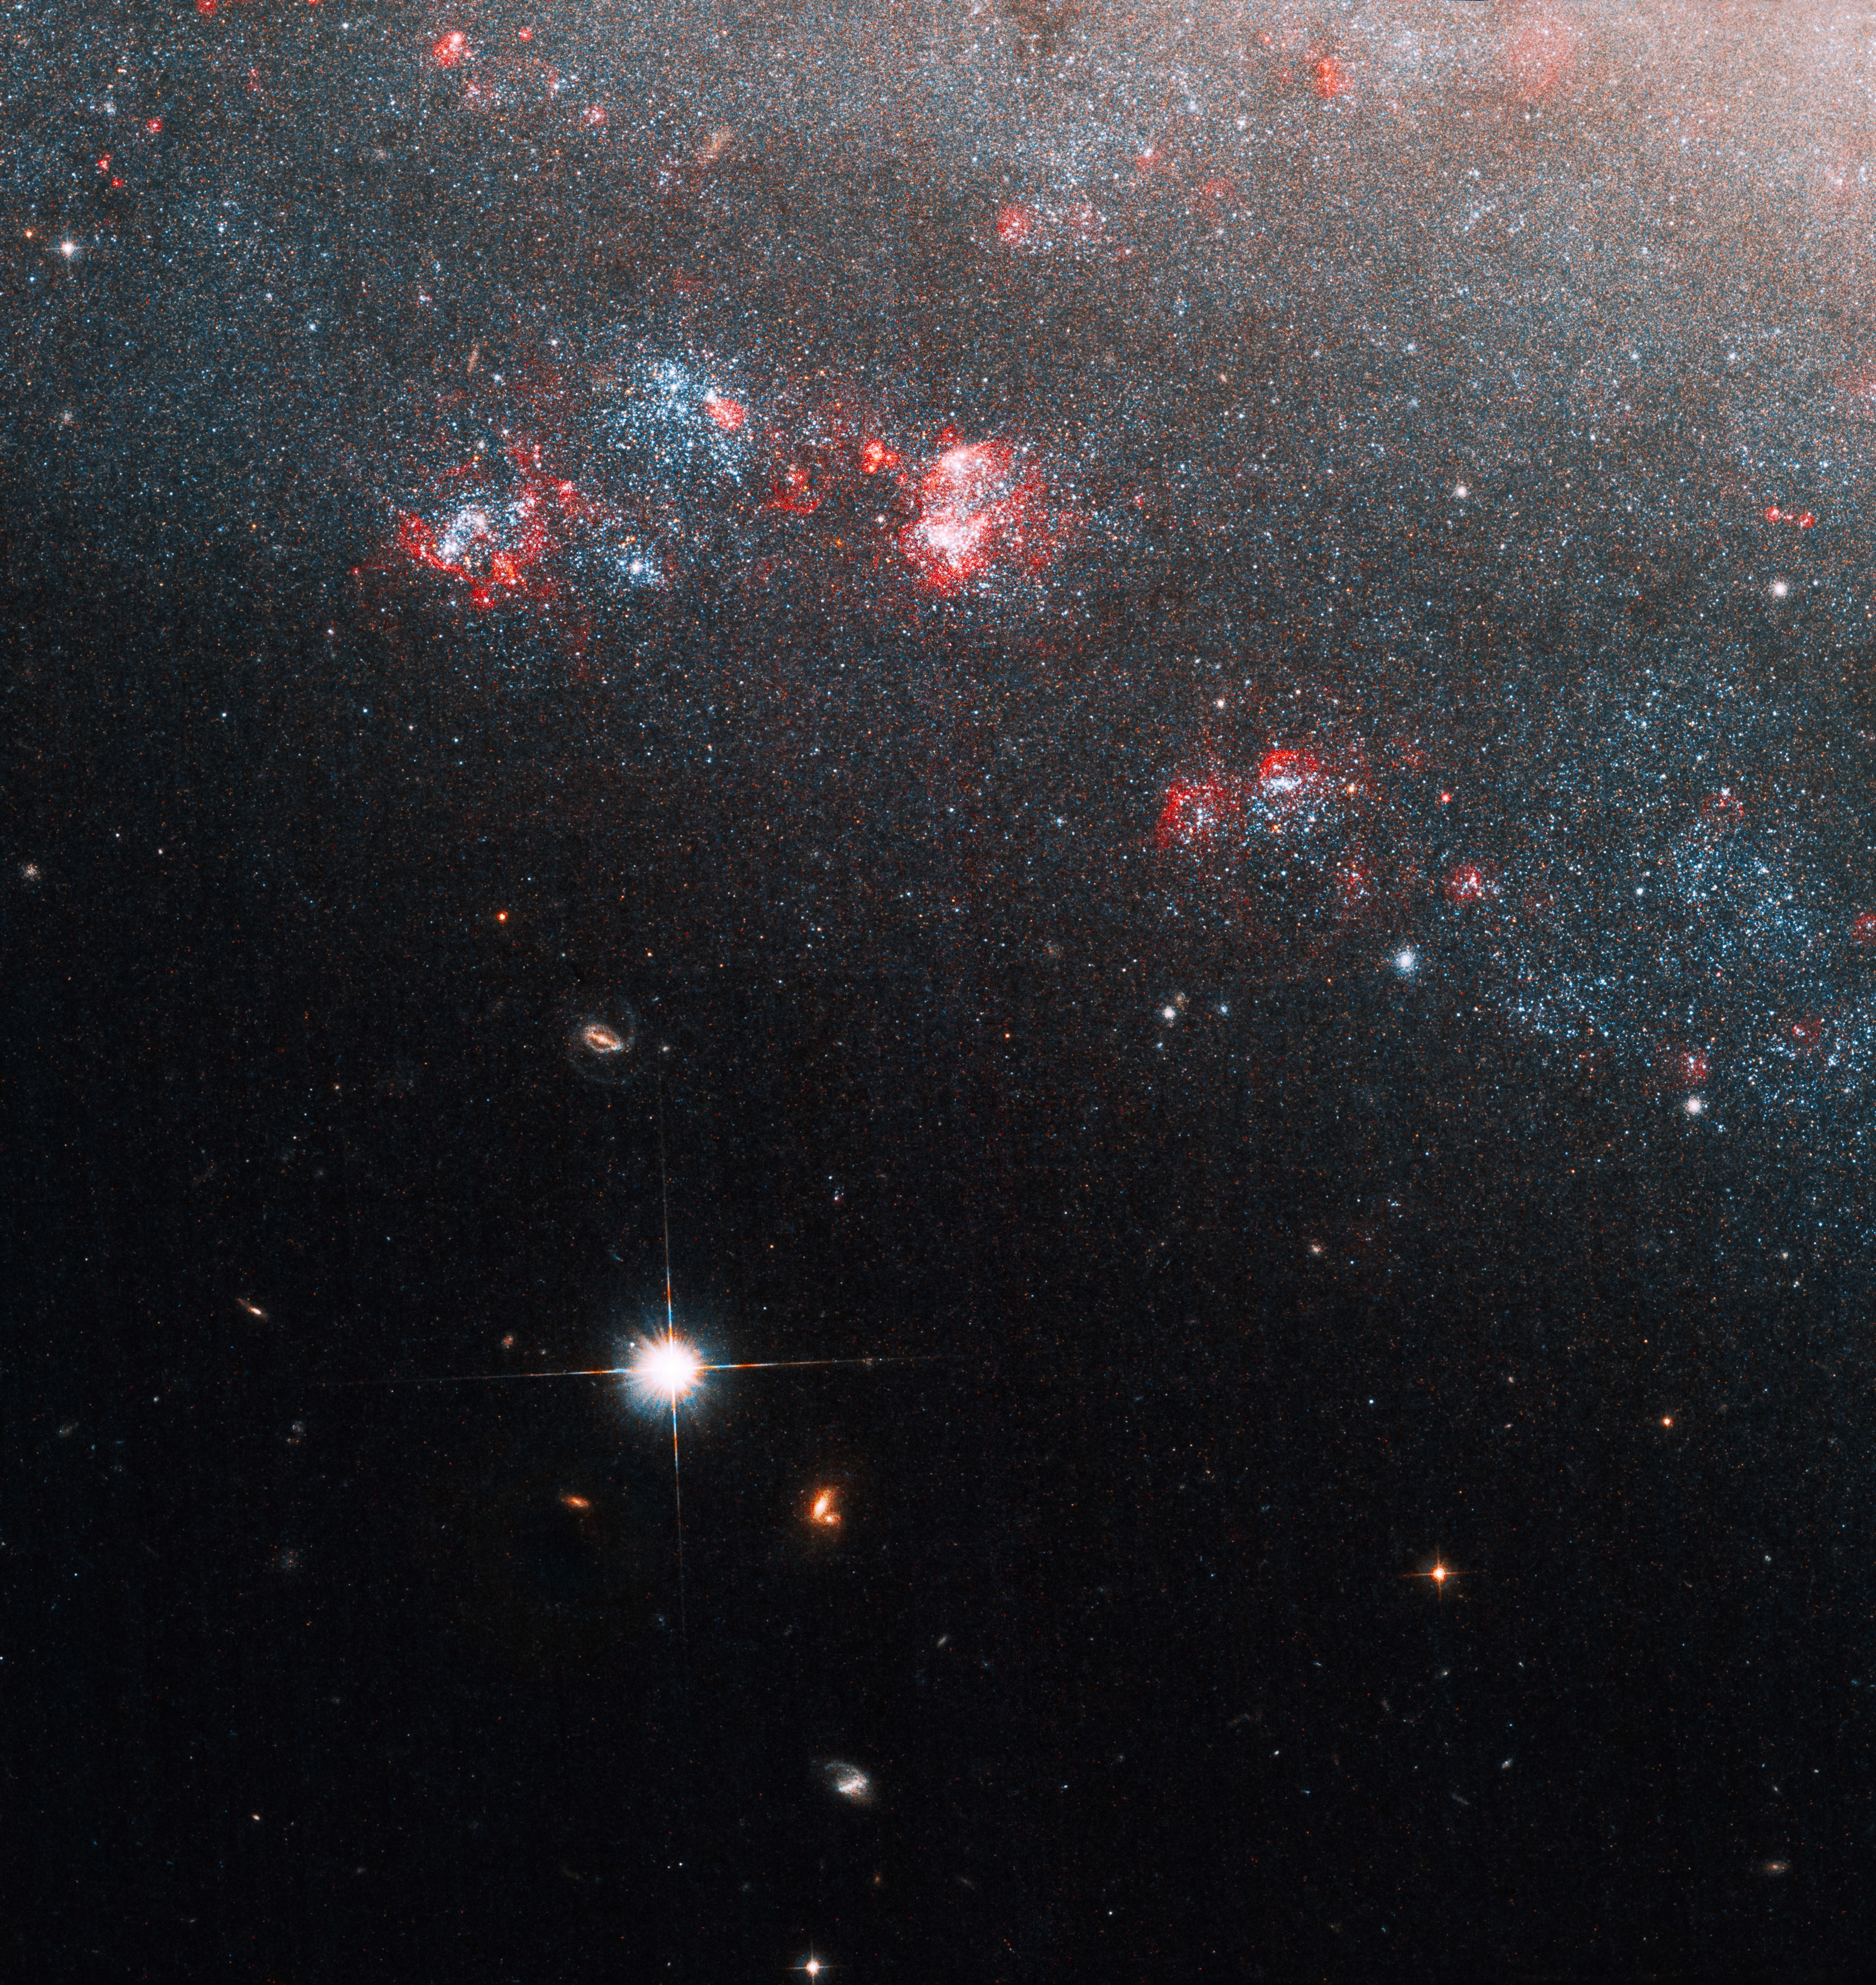 A haze of stars fills the top and upper right corner of NGC 247/Caldwell 62. The area is dotted with bright pinkish-red and blue gas clouds. The lower-left half of the image is black and dotted with one very bright star and a few dimmer ones.